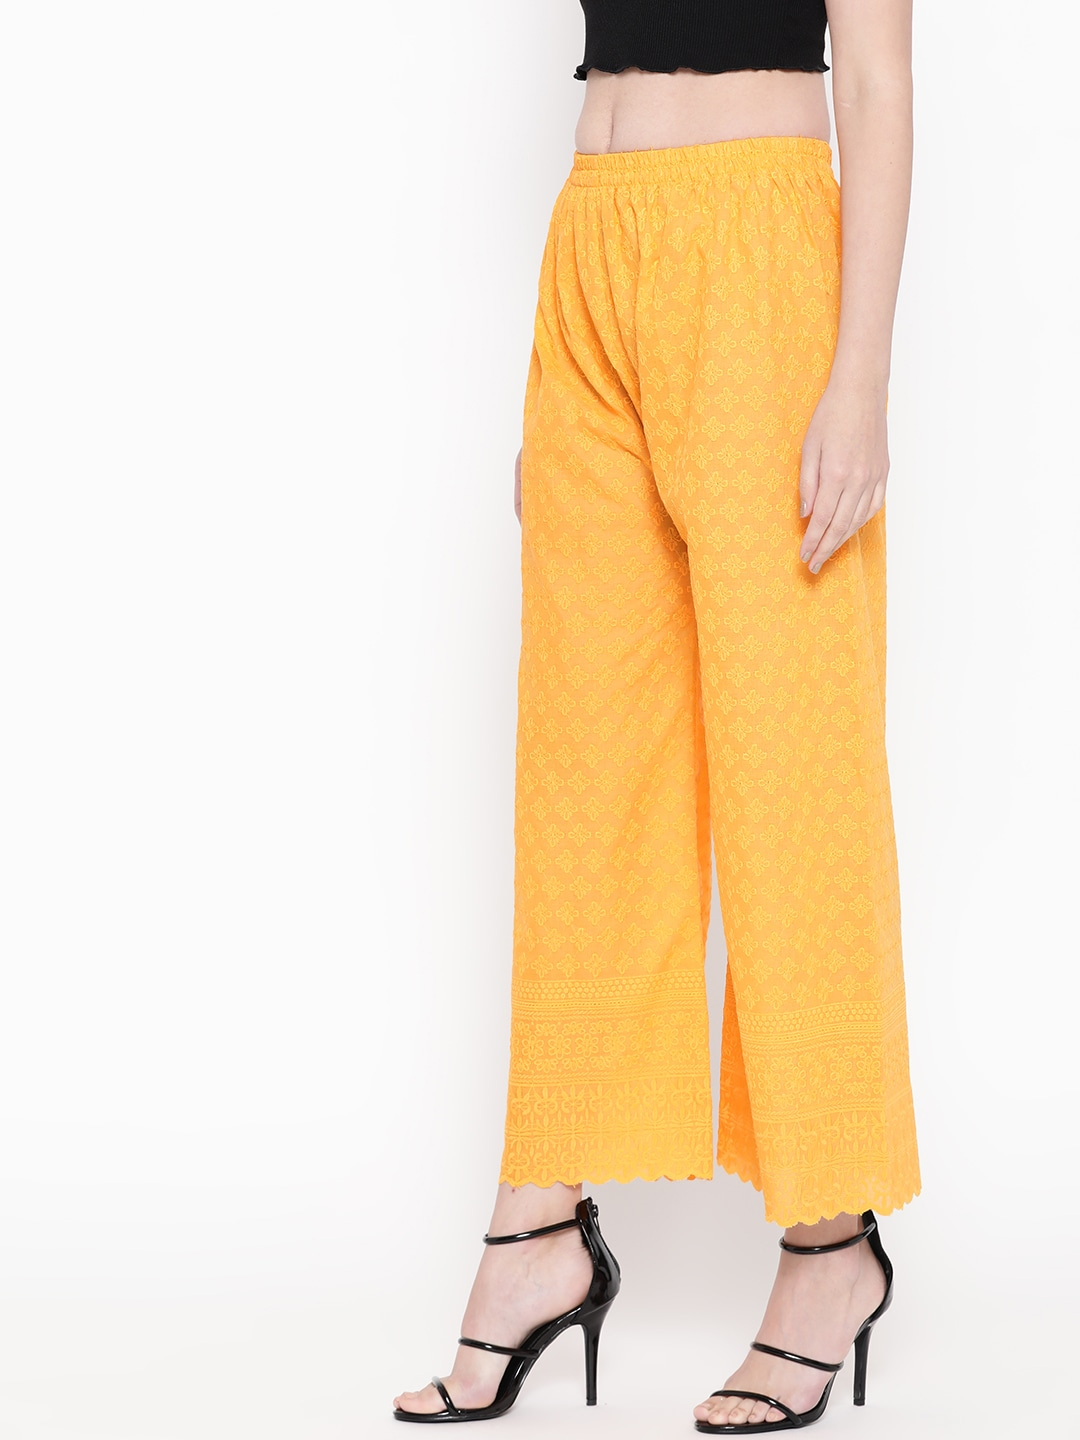 Cotton Ladies Chikan Palazzo pants, Size : 20-40, Feature : Anti-Wrinkle,  Comfortable, Dry Cleaning at Rs 350 / Piece in Delhi